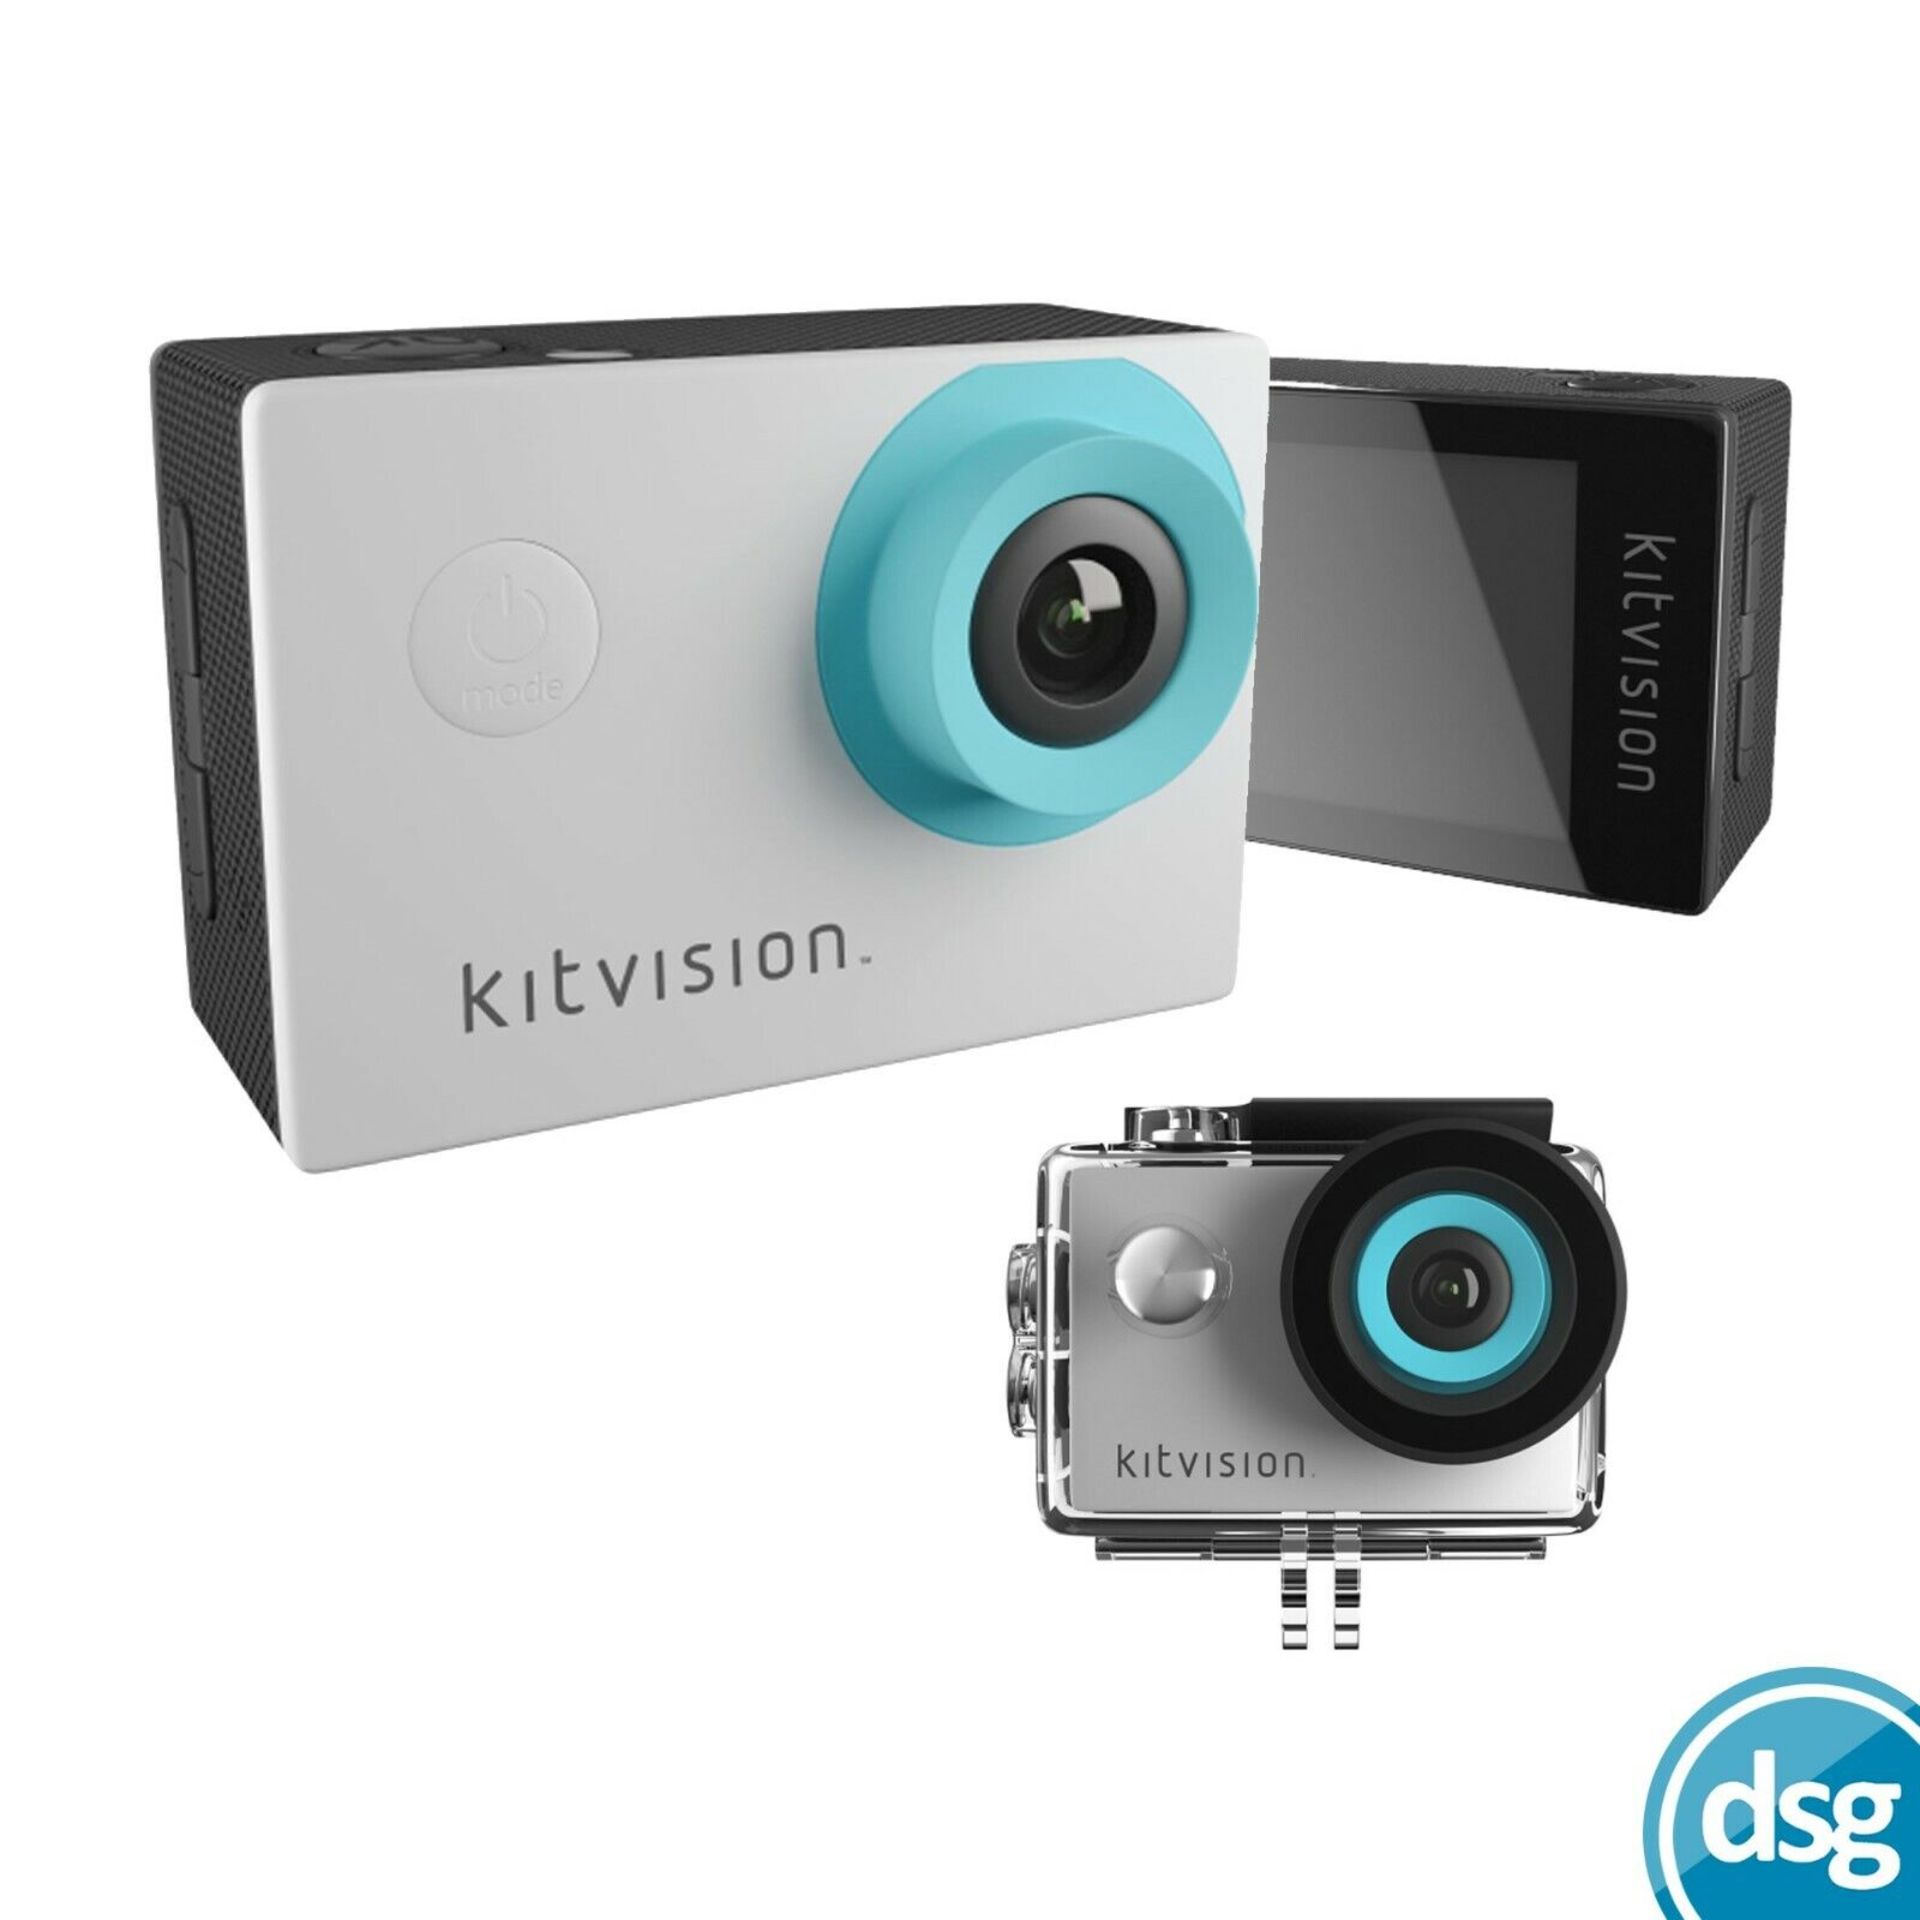 Kitvision 720p Action Camera & Accessories - New and Boxed - Image 2 of 5